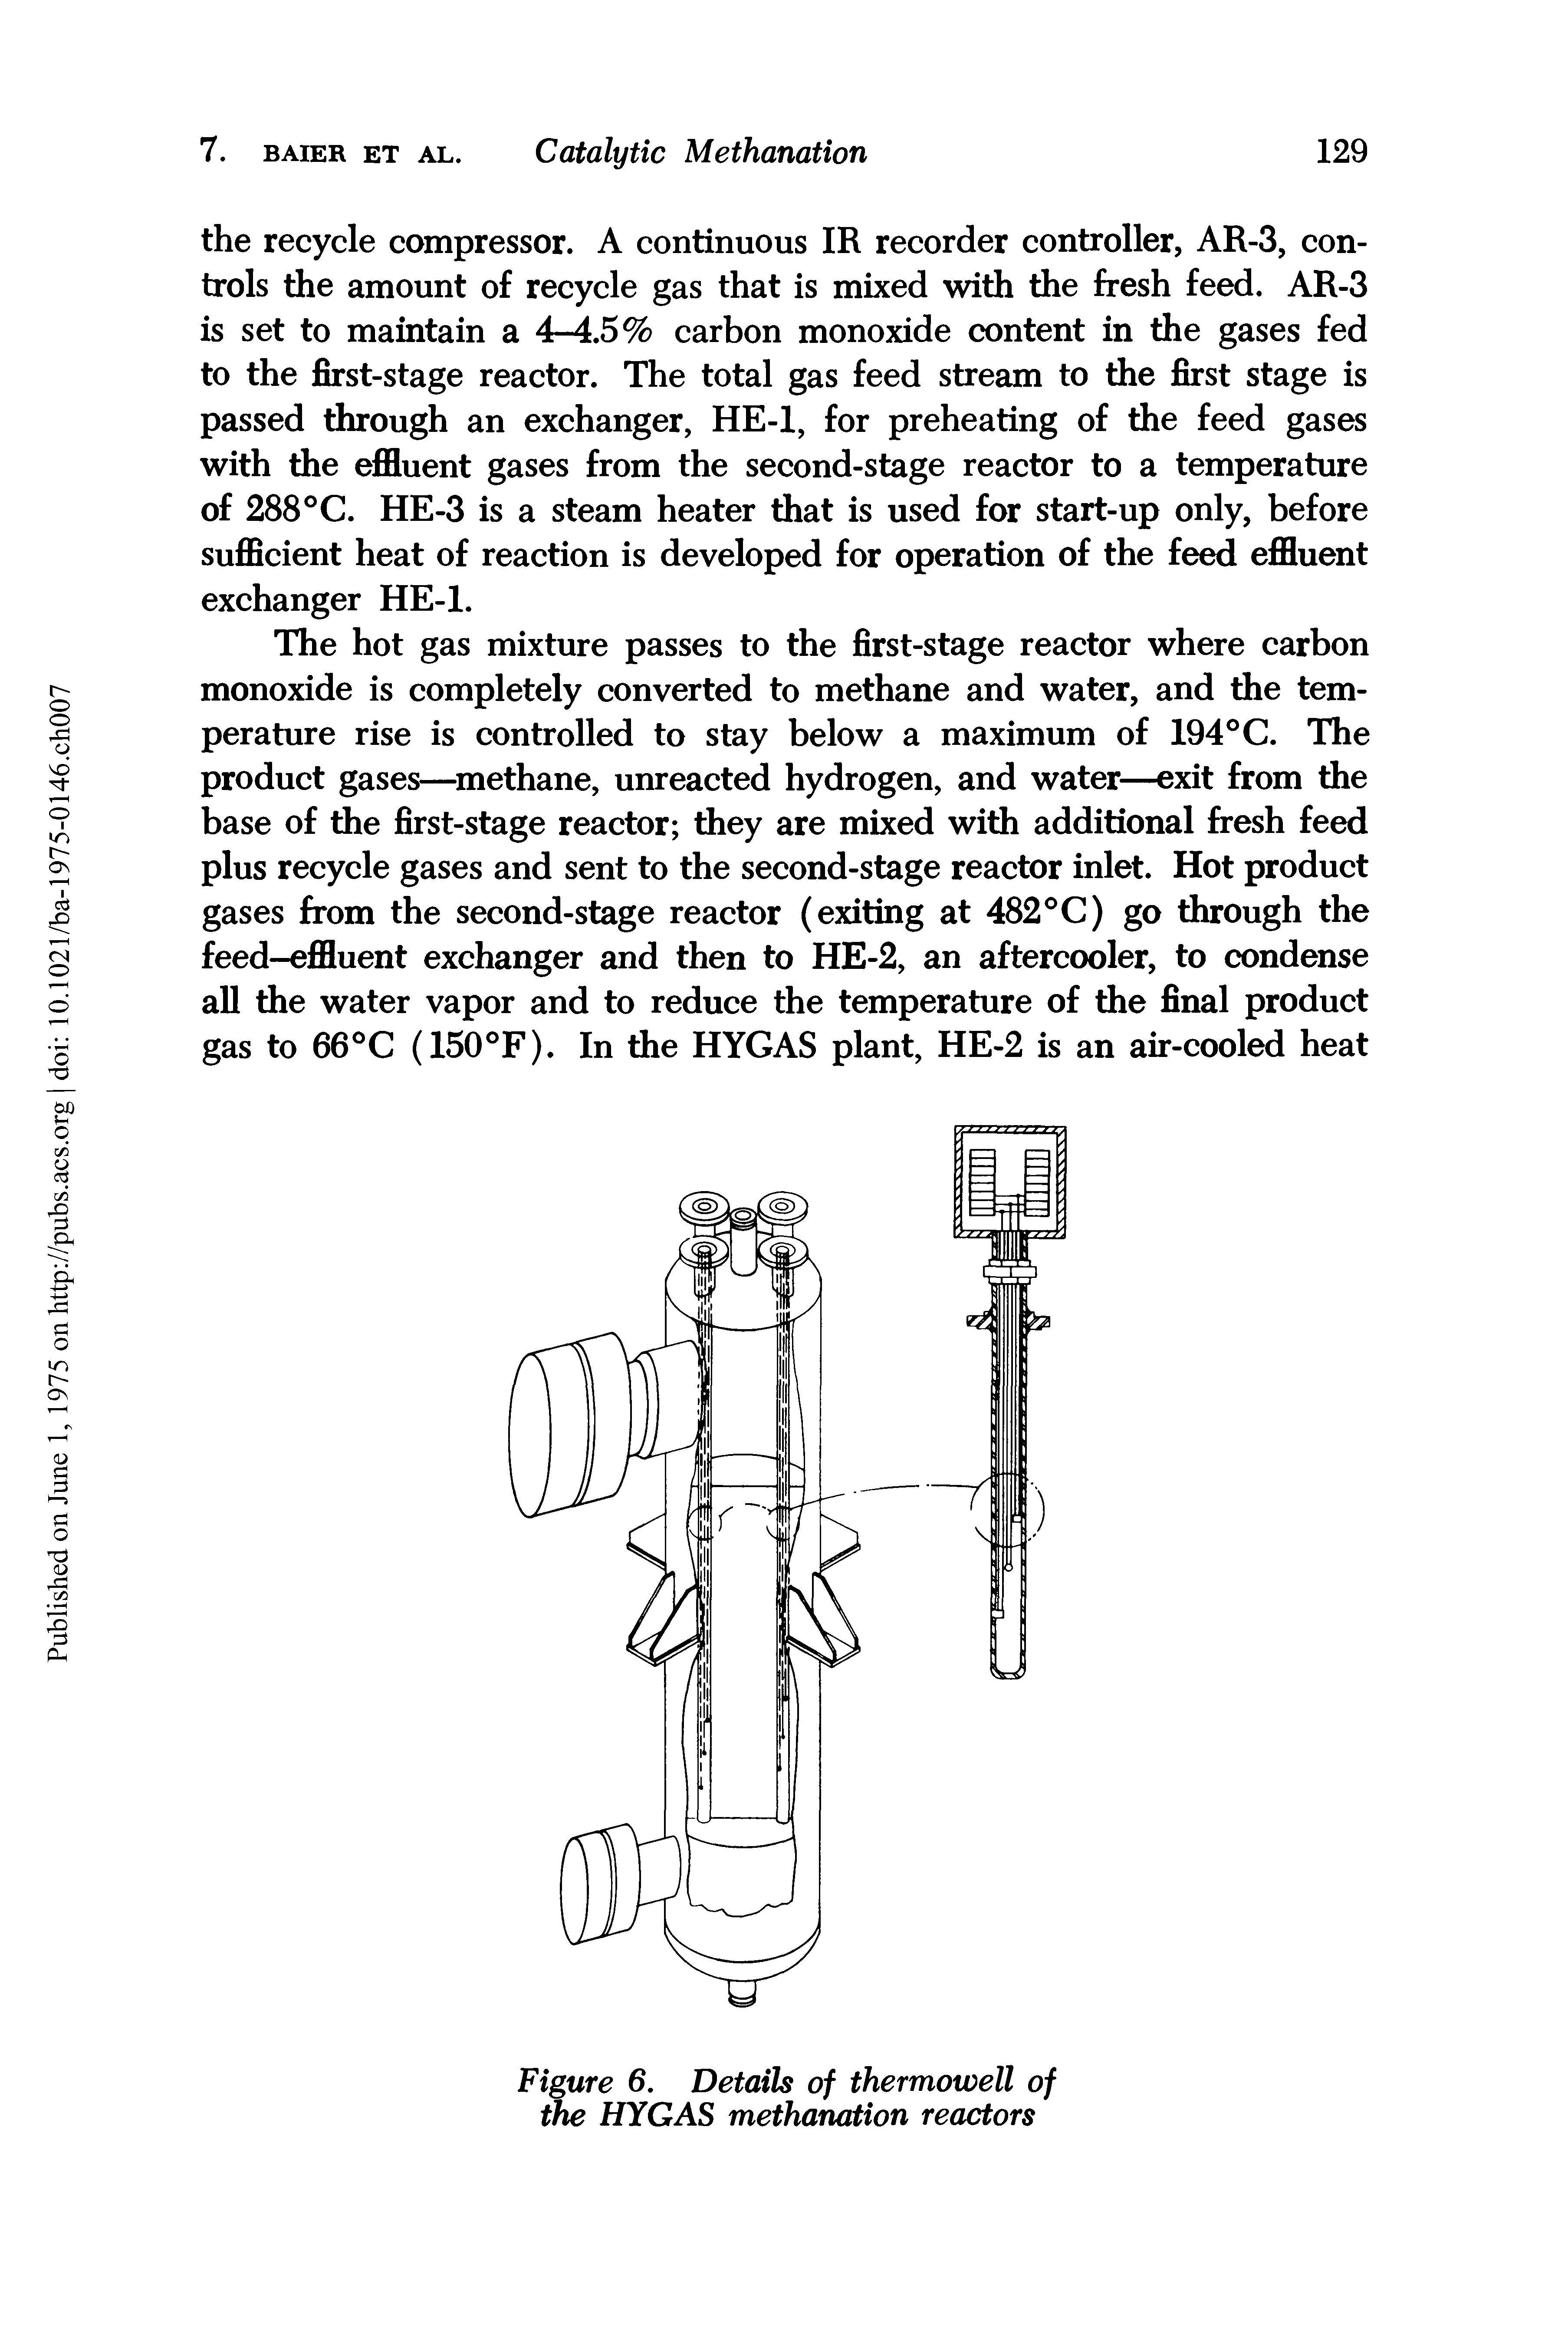 Figure 6. Details of thermowell of the HYGAS methanation reactors...